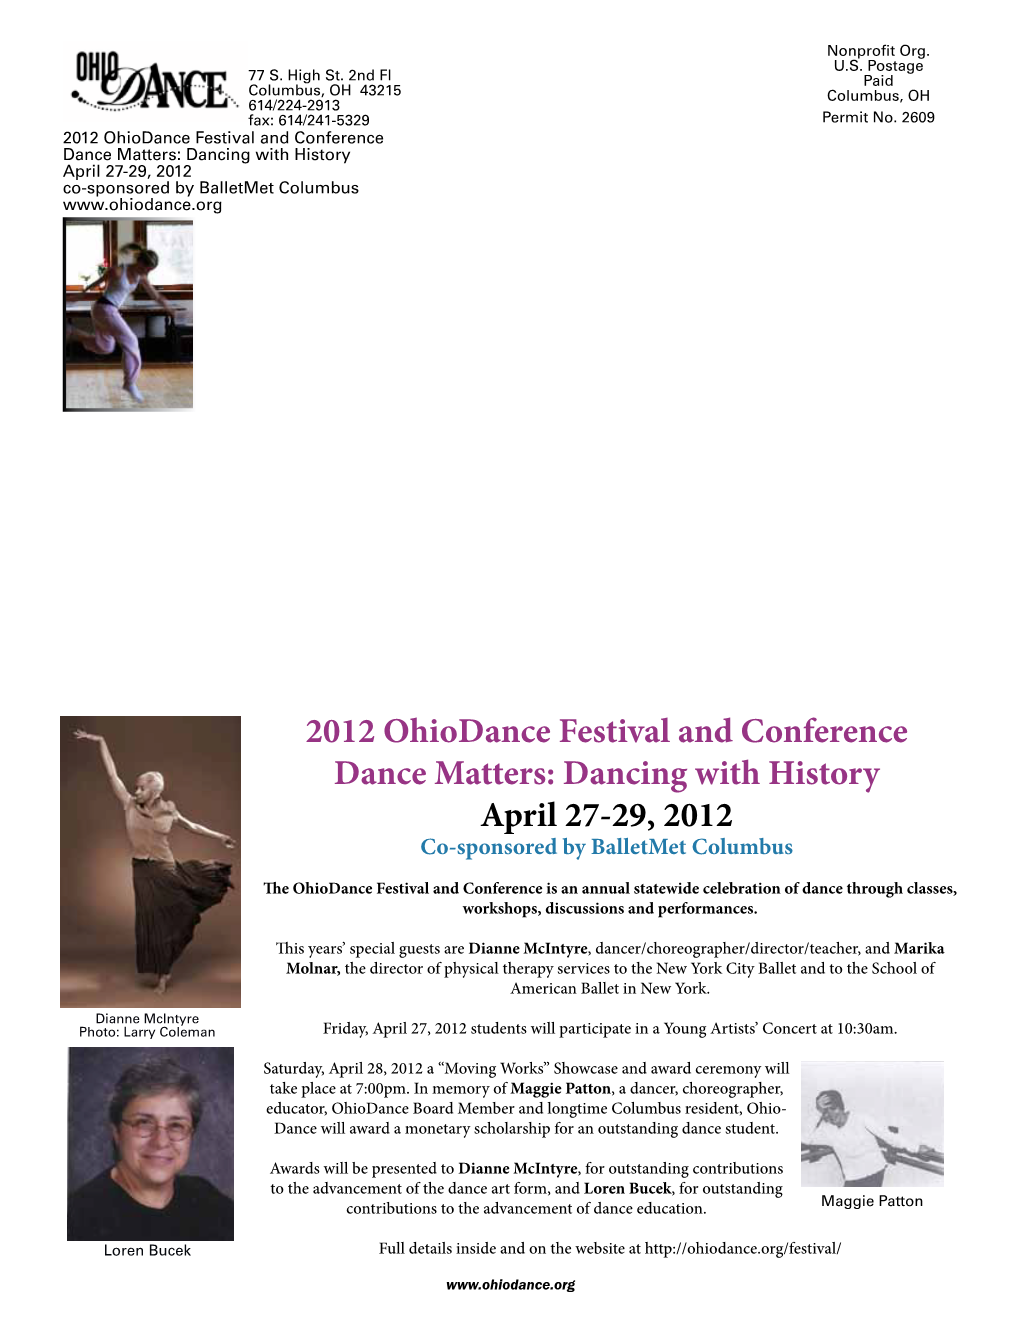 2012 Ohiodance Festival and Conference Dance Matters: Dancing with History April 27-29, 2012 Co-Sponsored by Balletmet Columbus